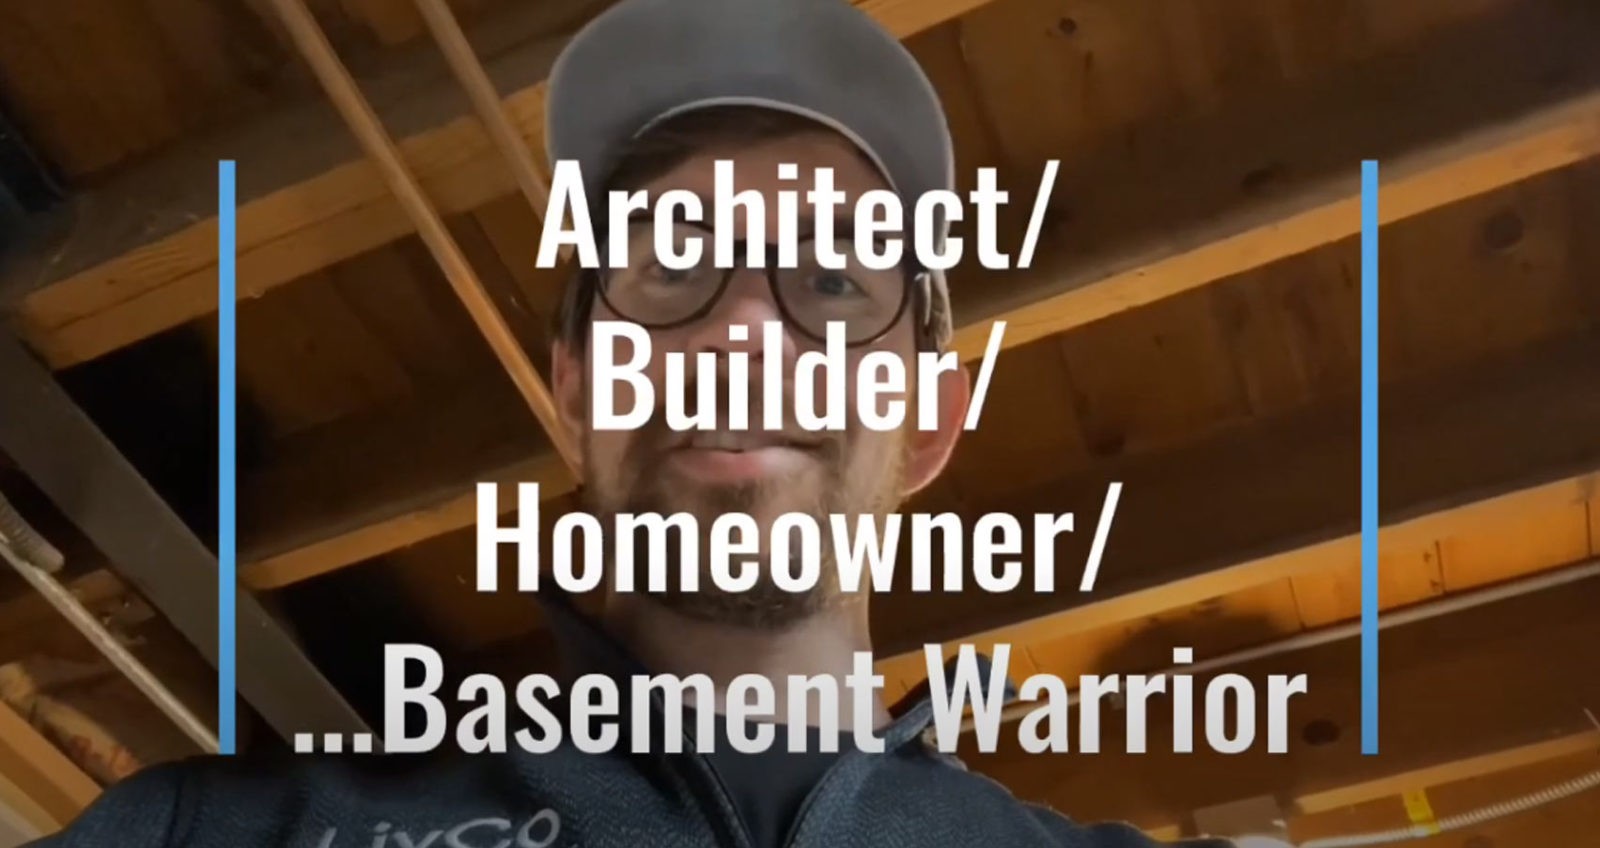 Image of architect with text over the image reading "Architect/ Builder/ Homeowner/ ... Basement Warrior"